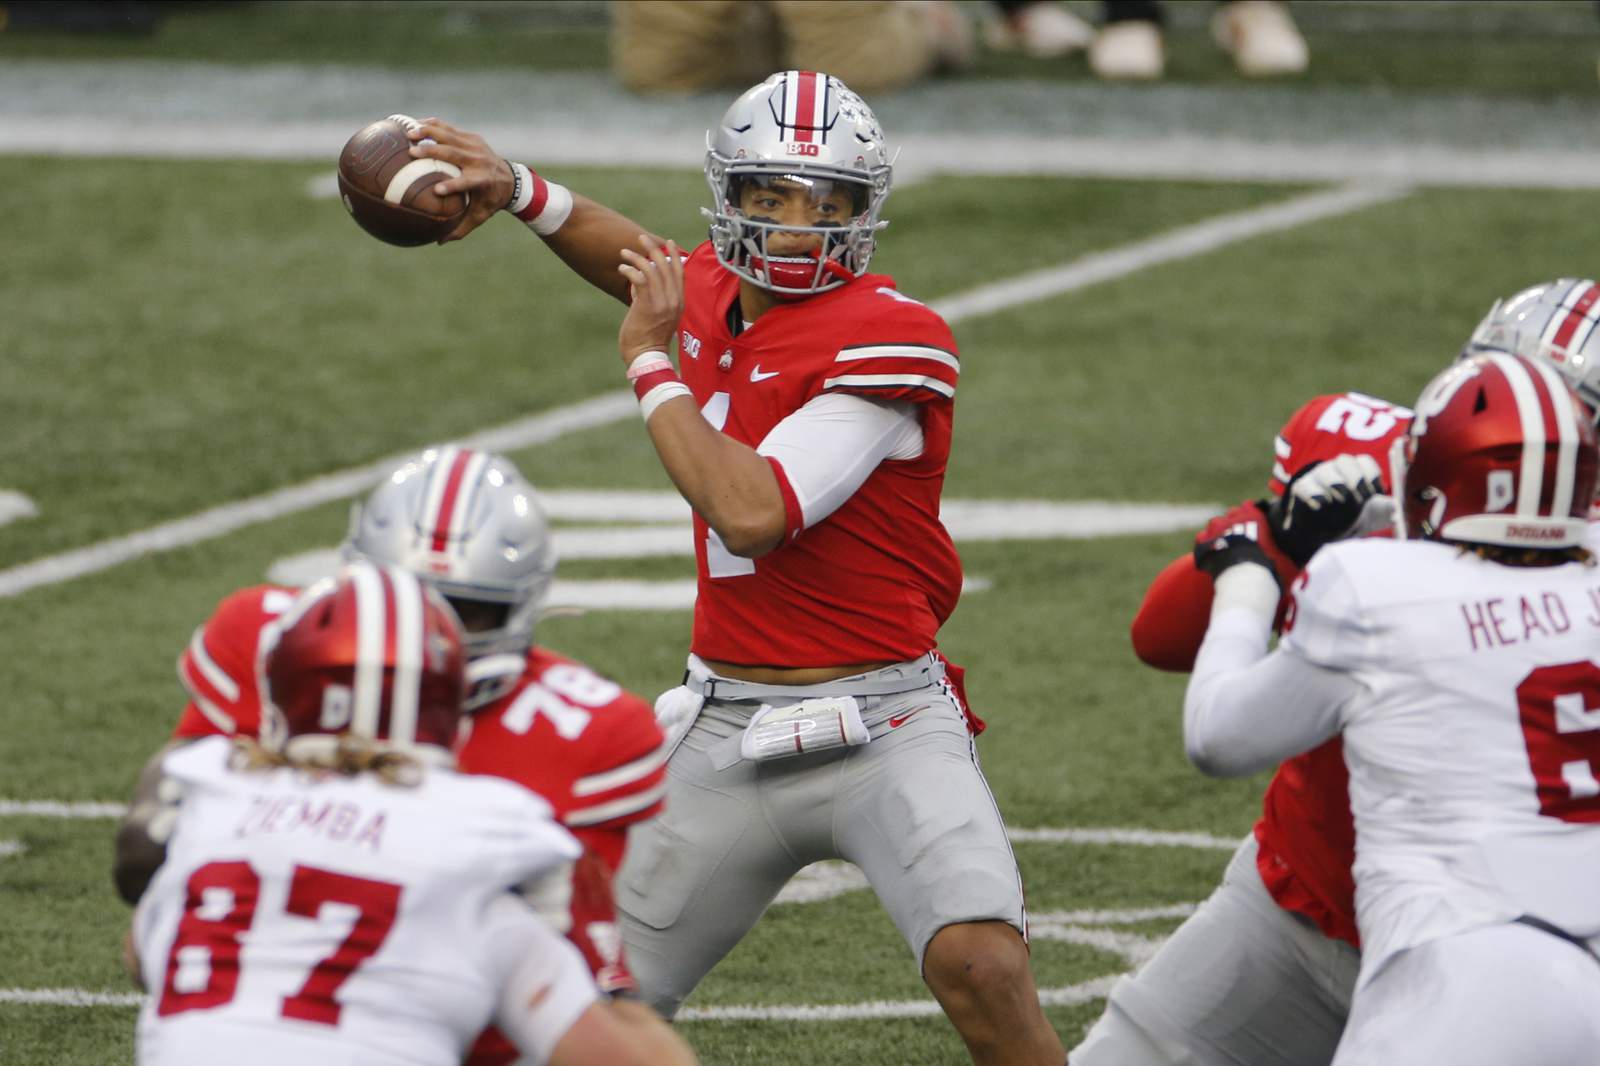 AP All-Big Ten: Ohio State's Fields, Indiana's Allen honored